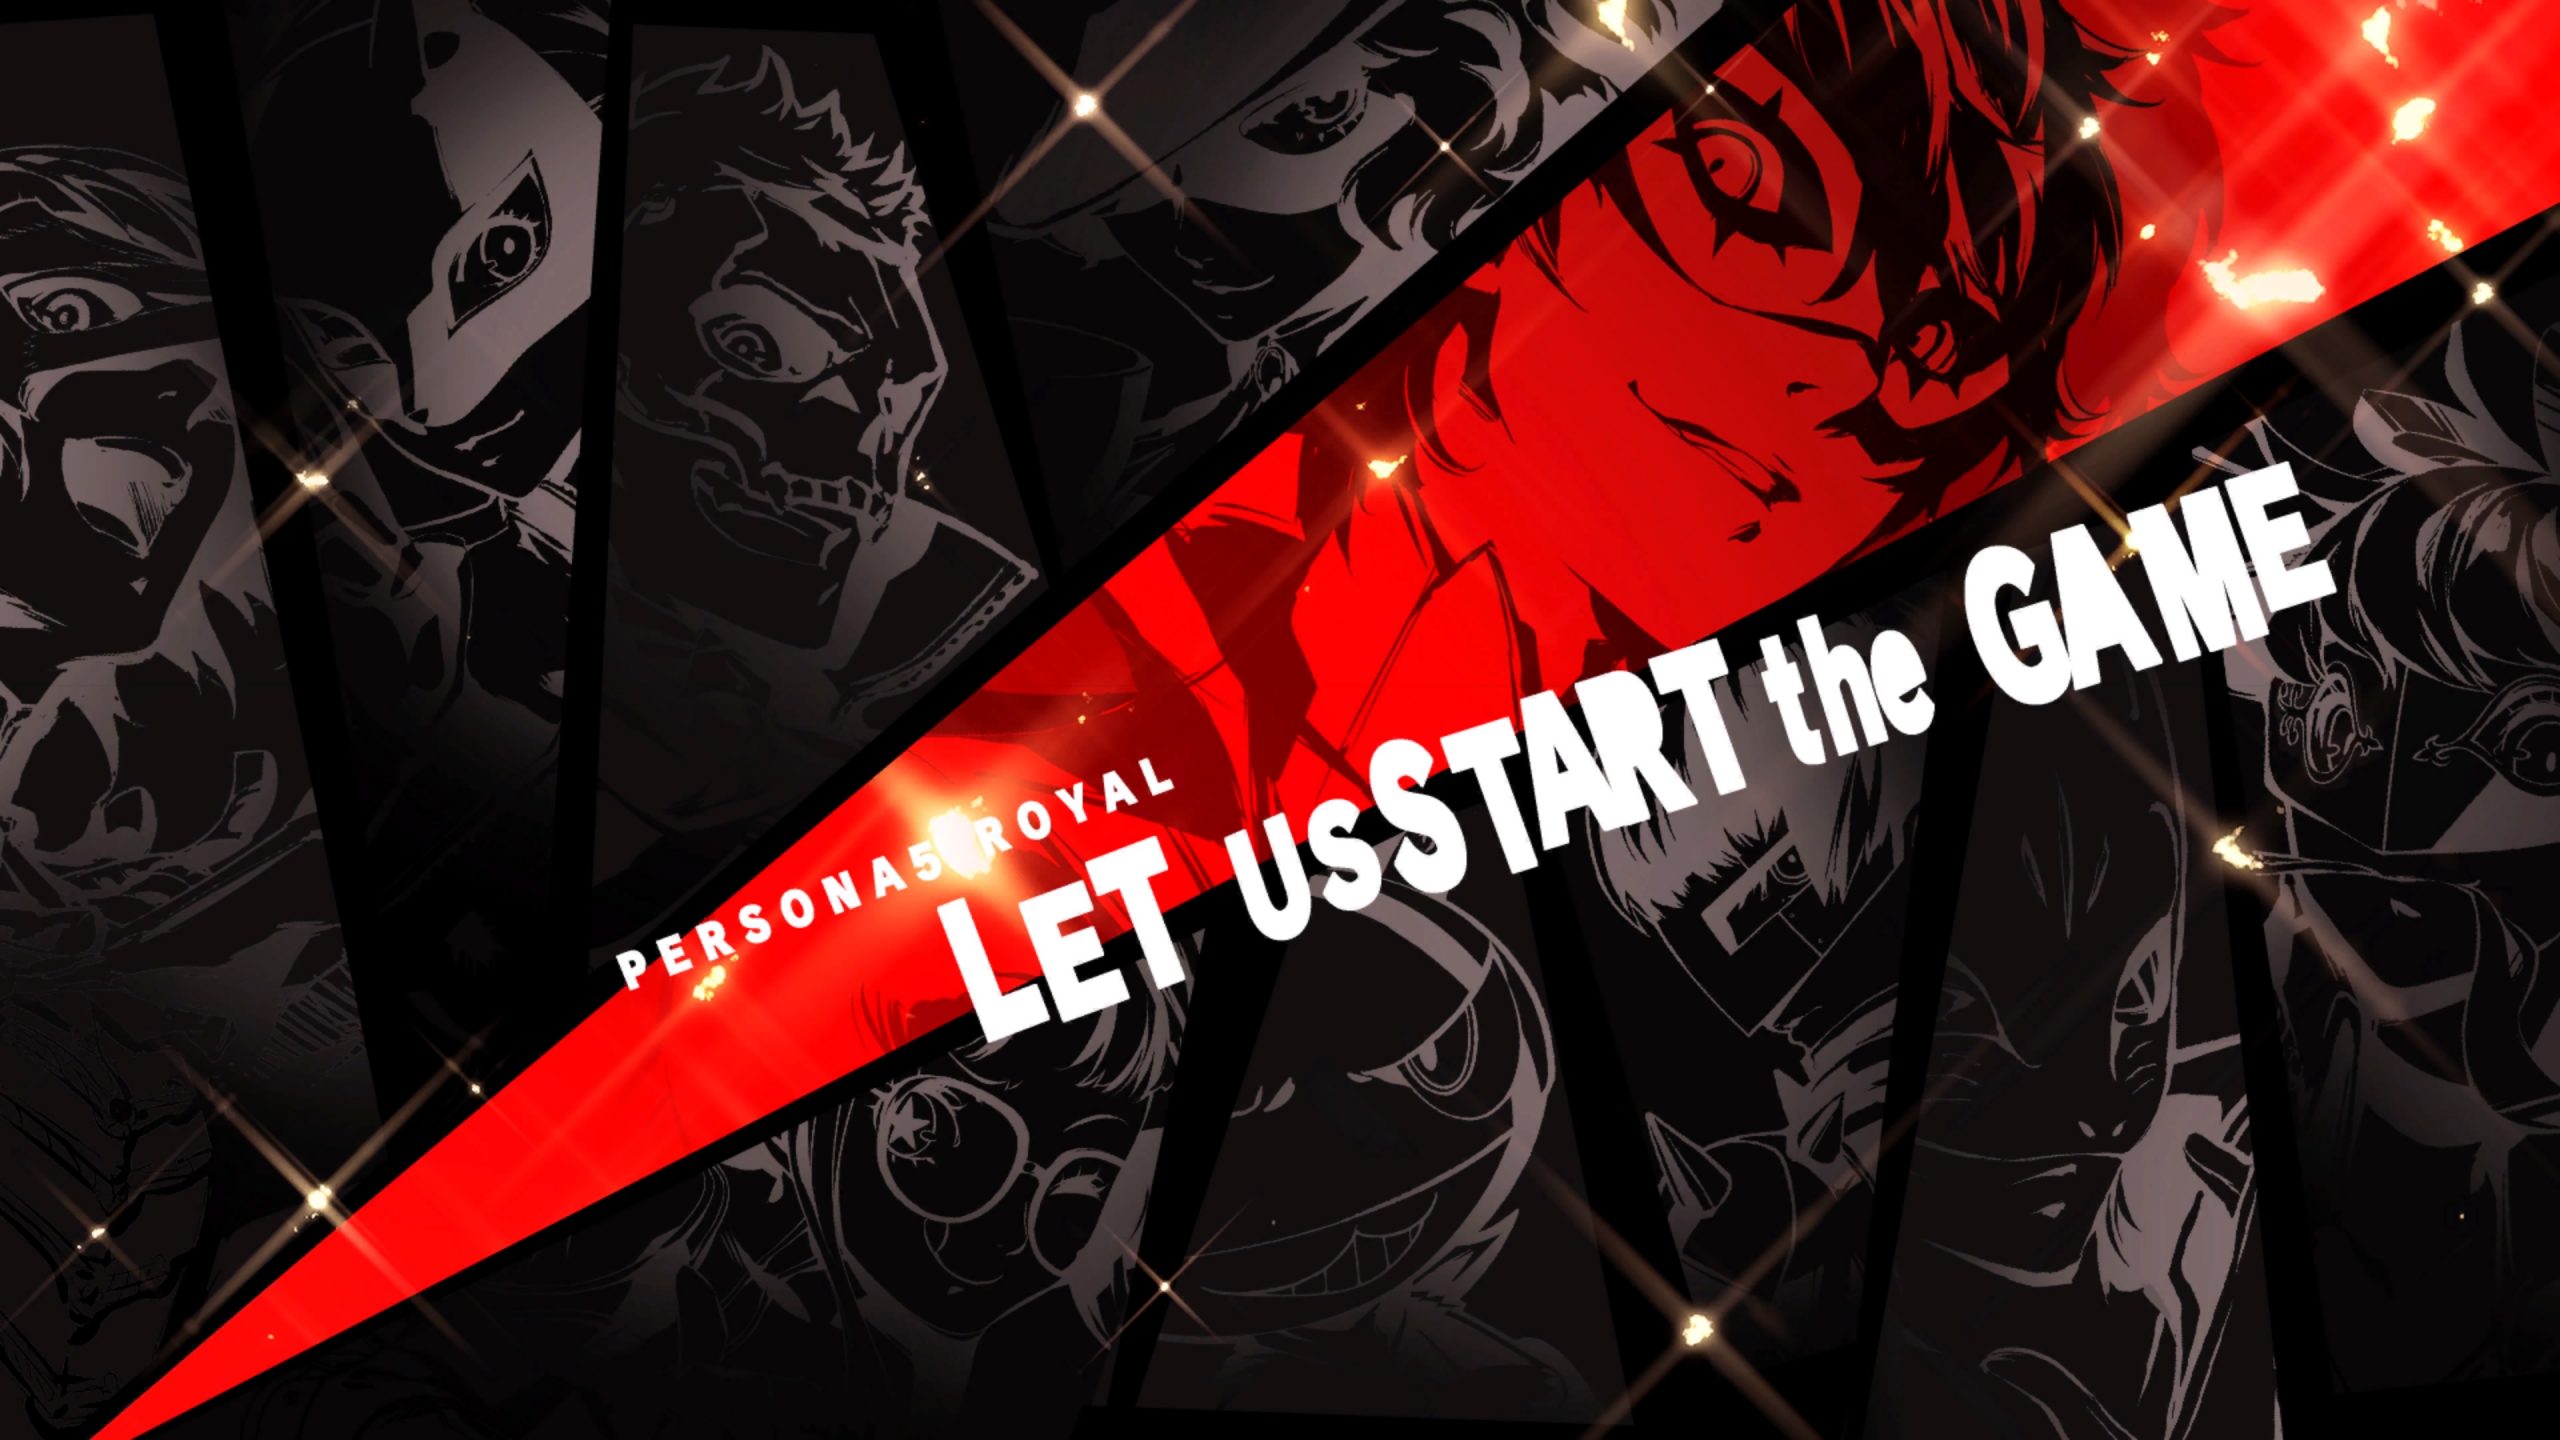 Persona 5 Royal Is Making Its Way To The Xbox Game Pass